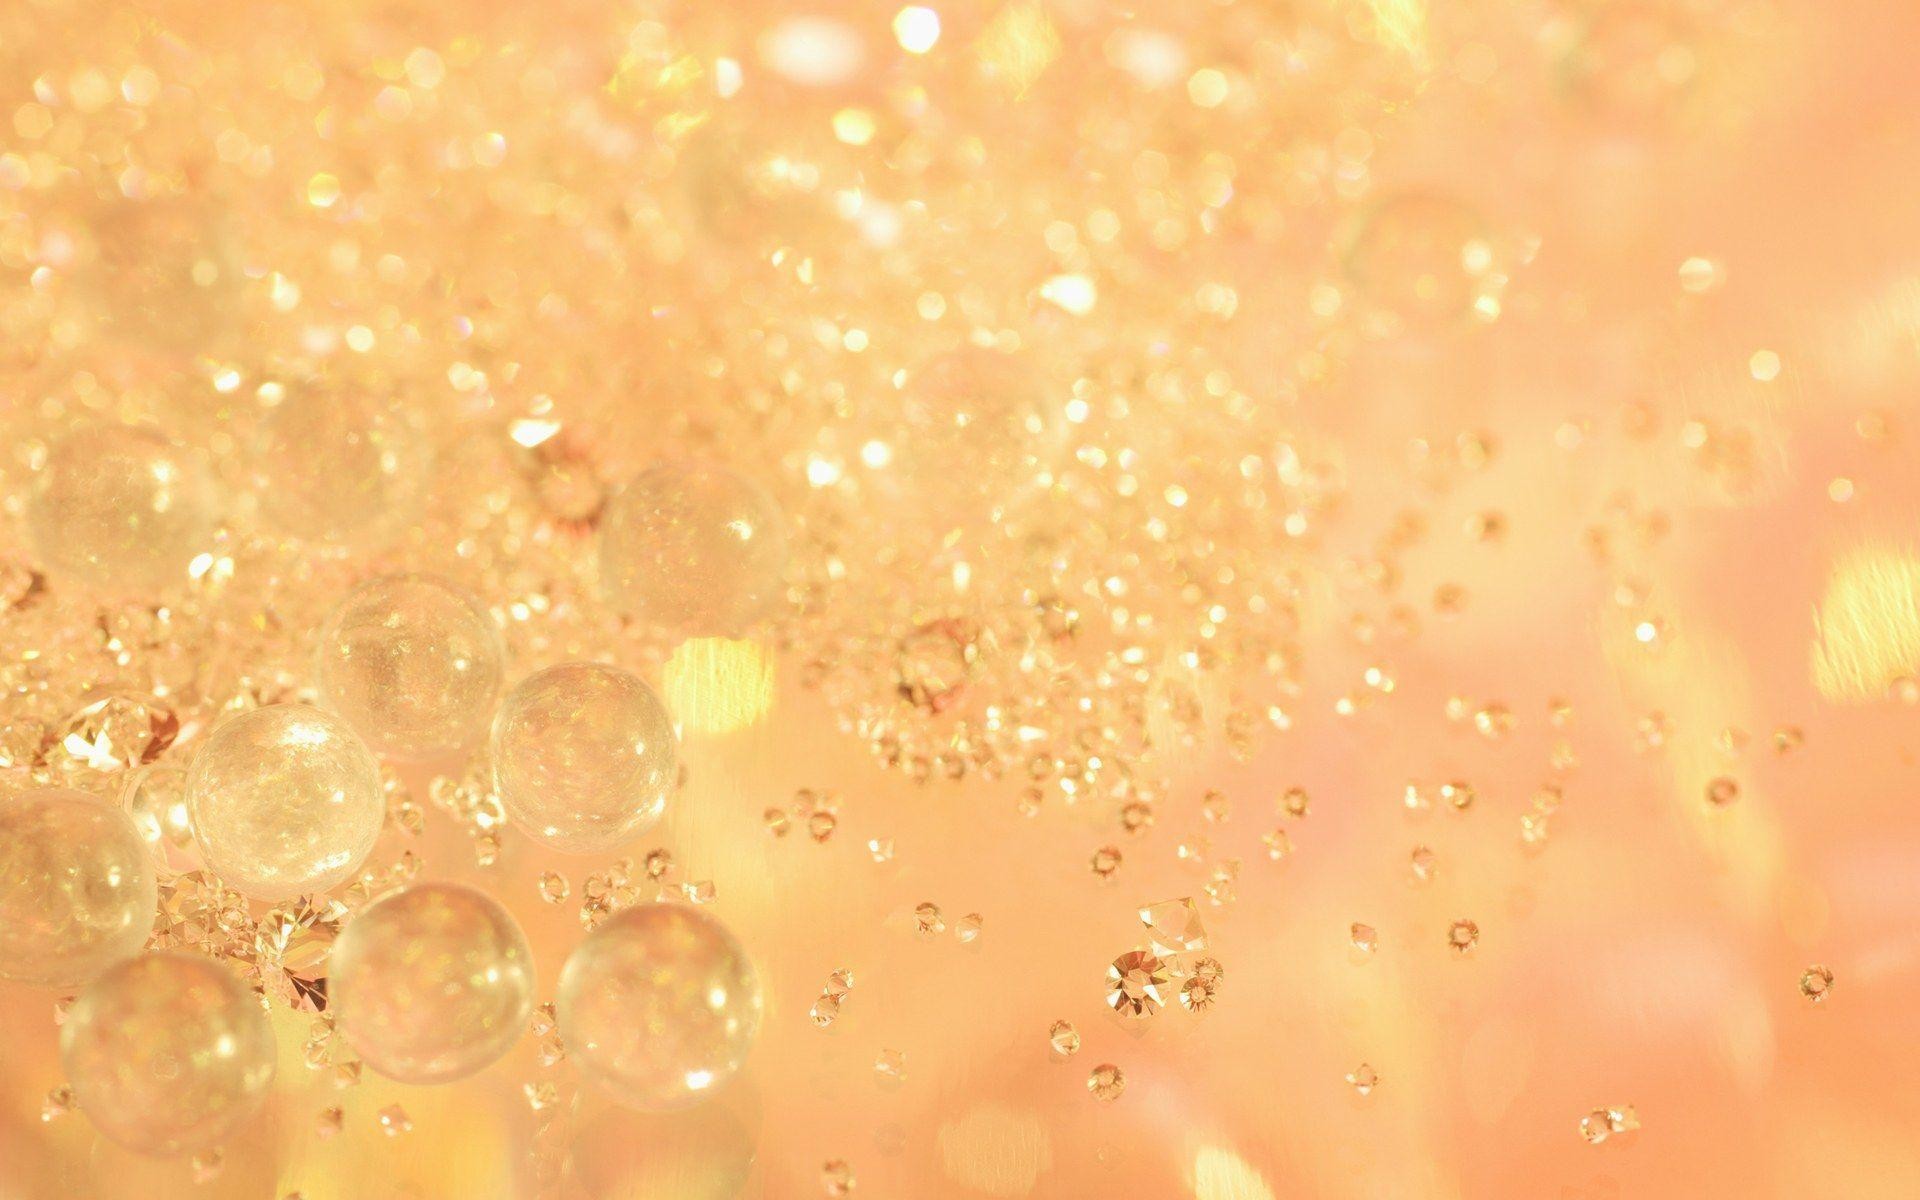 1920x1200 Sparkling and Romantic Backgrounds HK015 350A Wallpapers - HD .